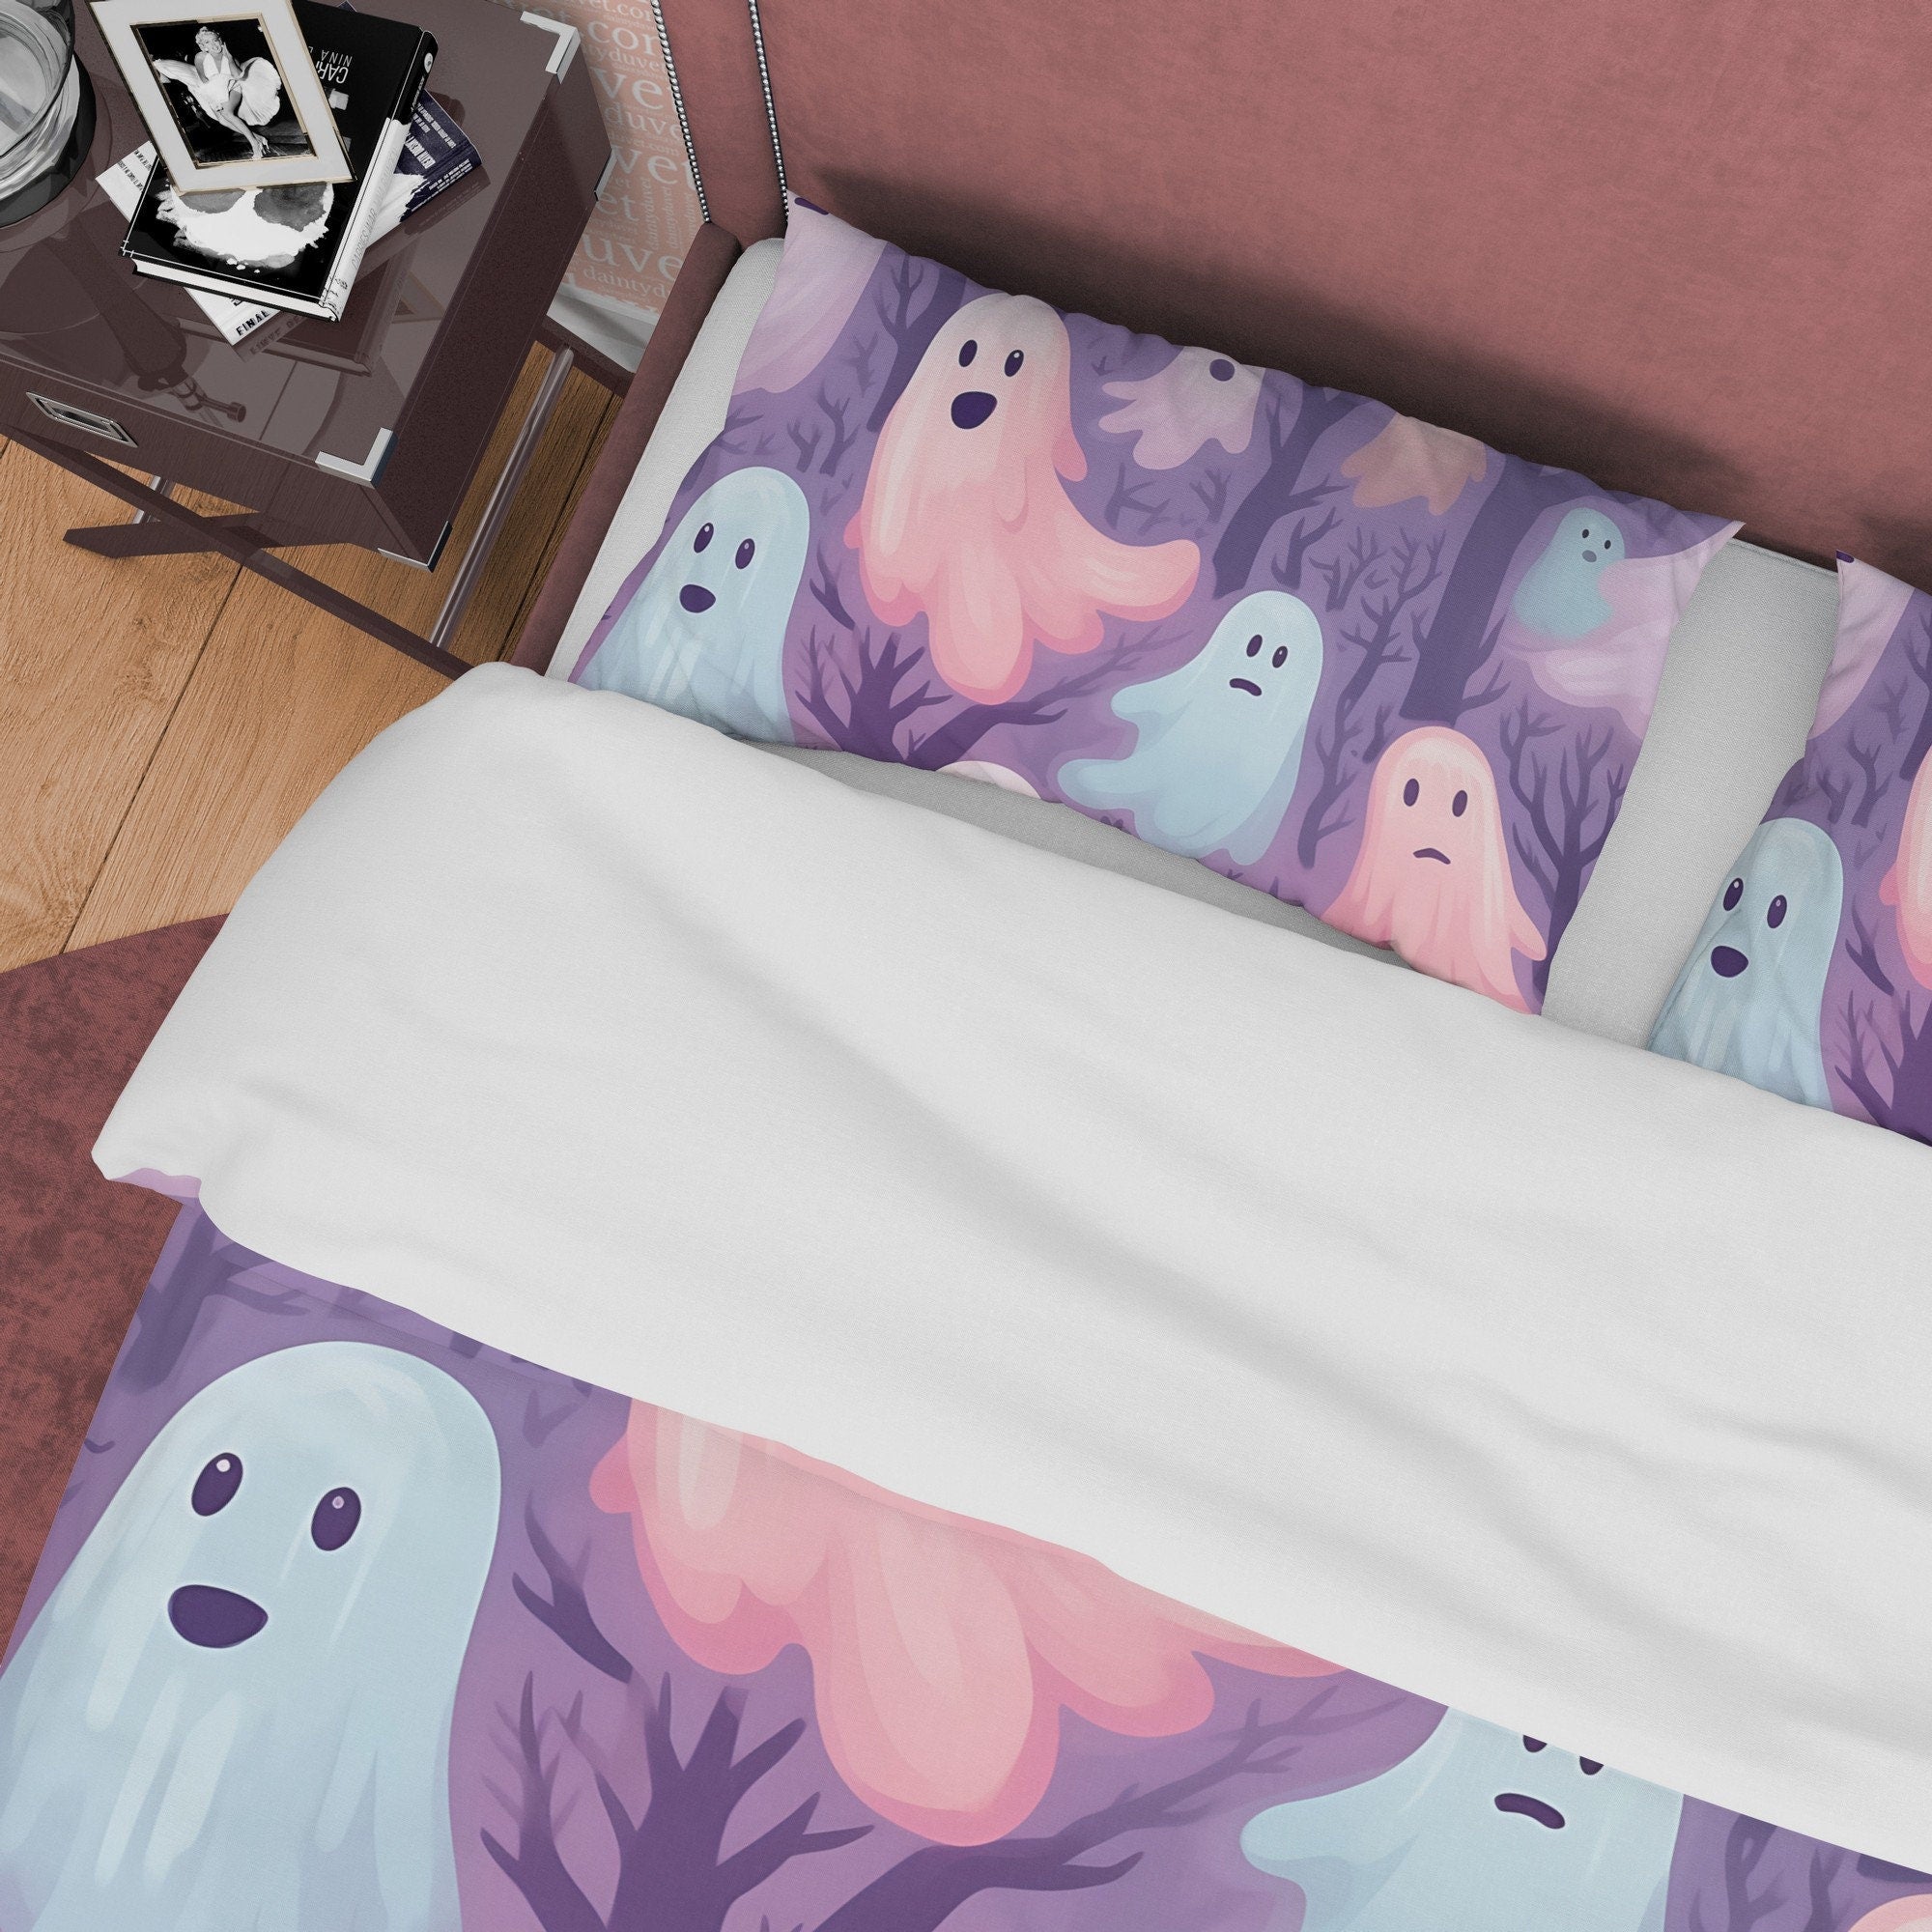 Spooky Pink and Blue Ghosts, Purple Duvet Cover Set, Aesthetic Bedding, Halloween Room Decor, US, UK, European, Australian Bed Size